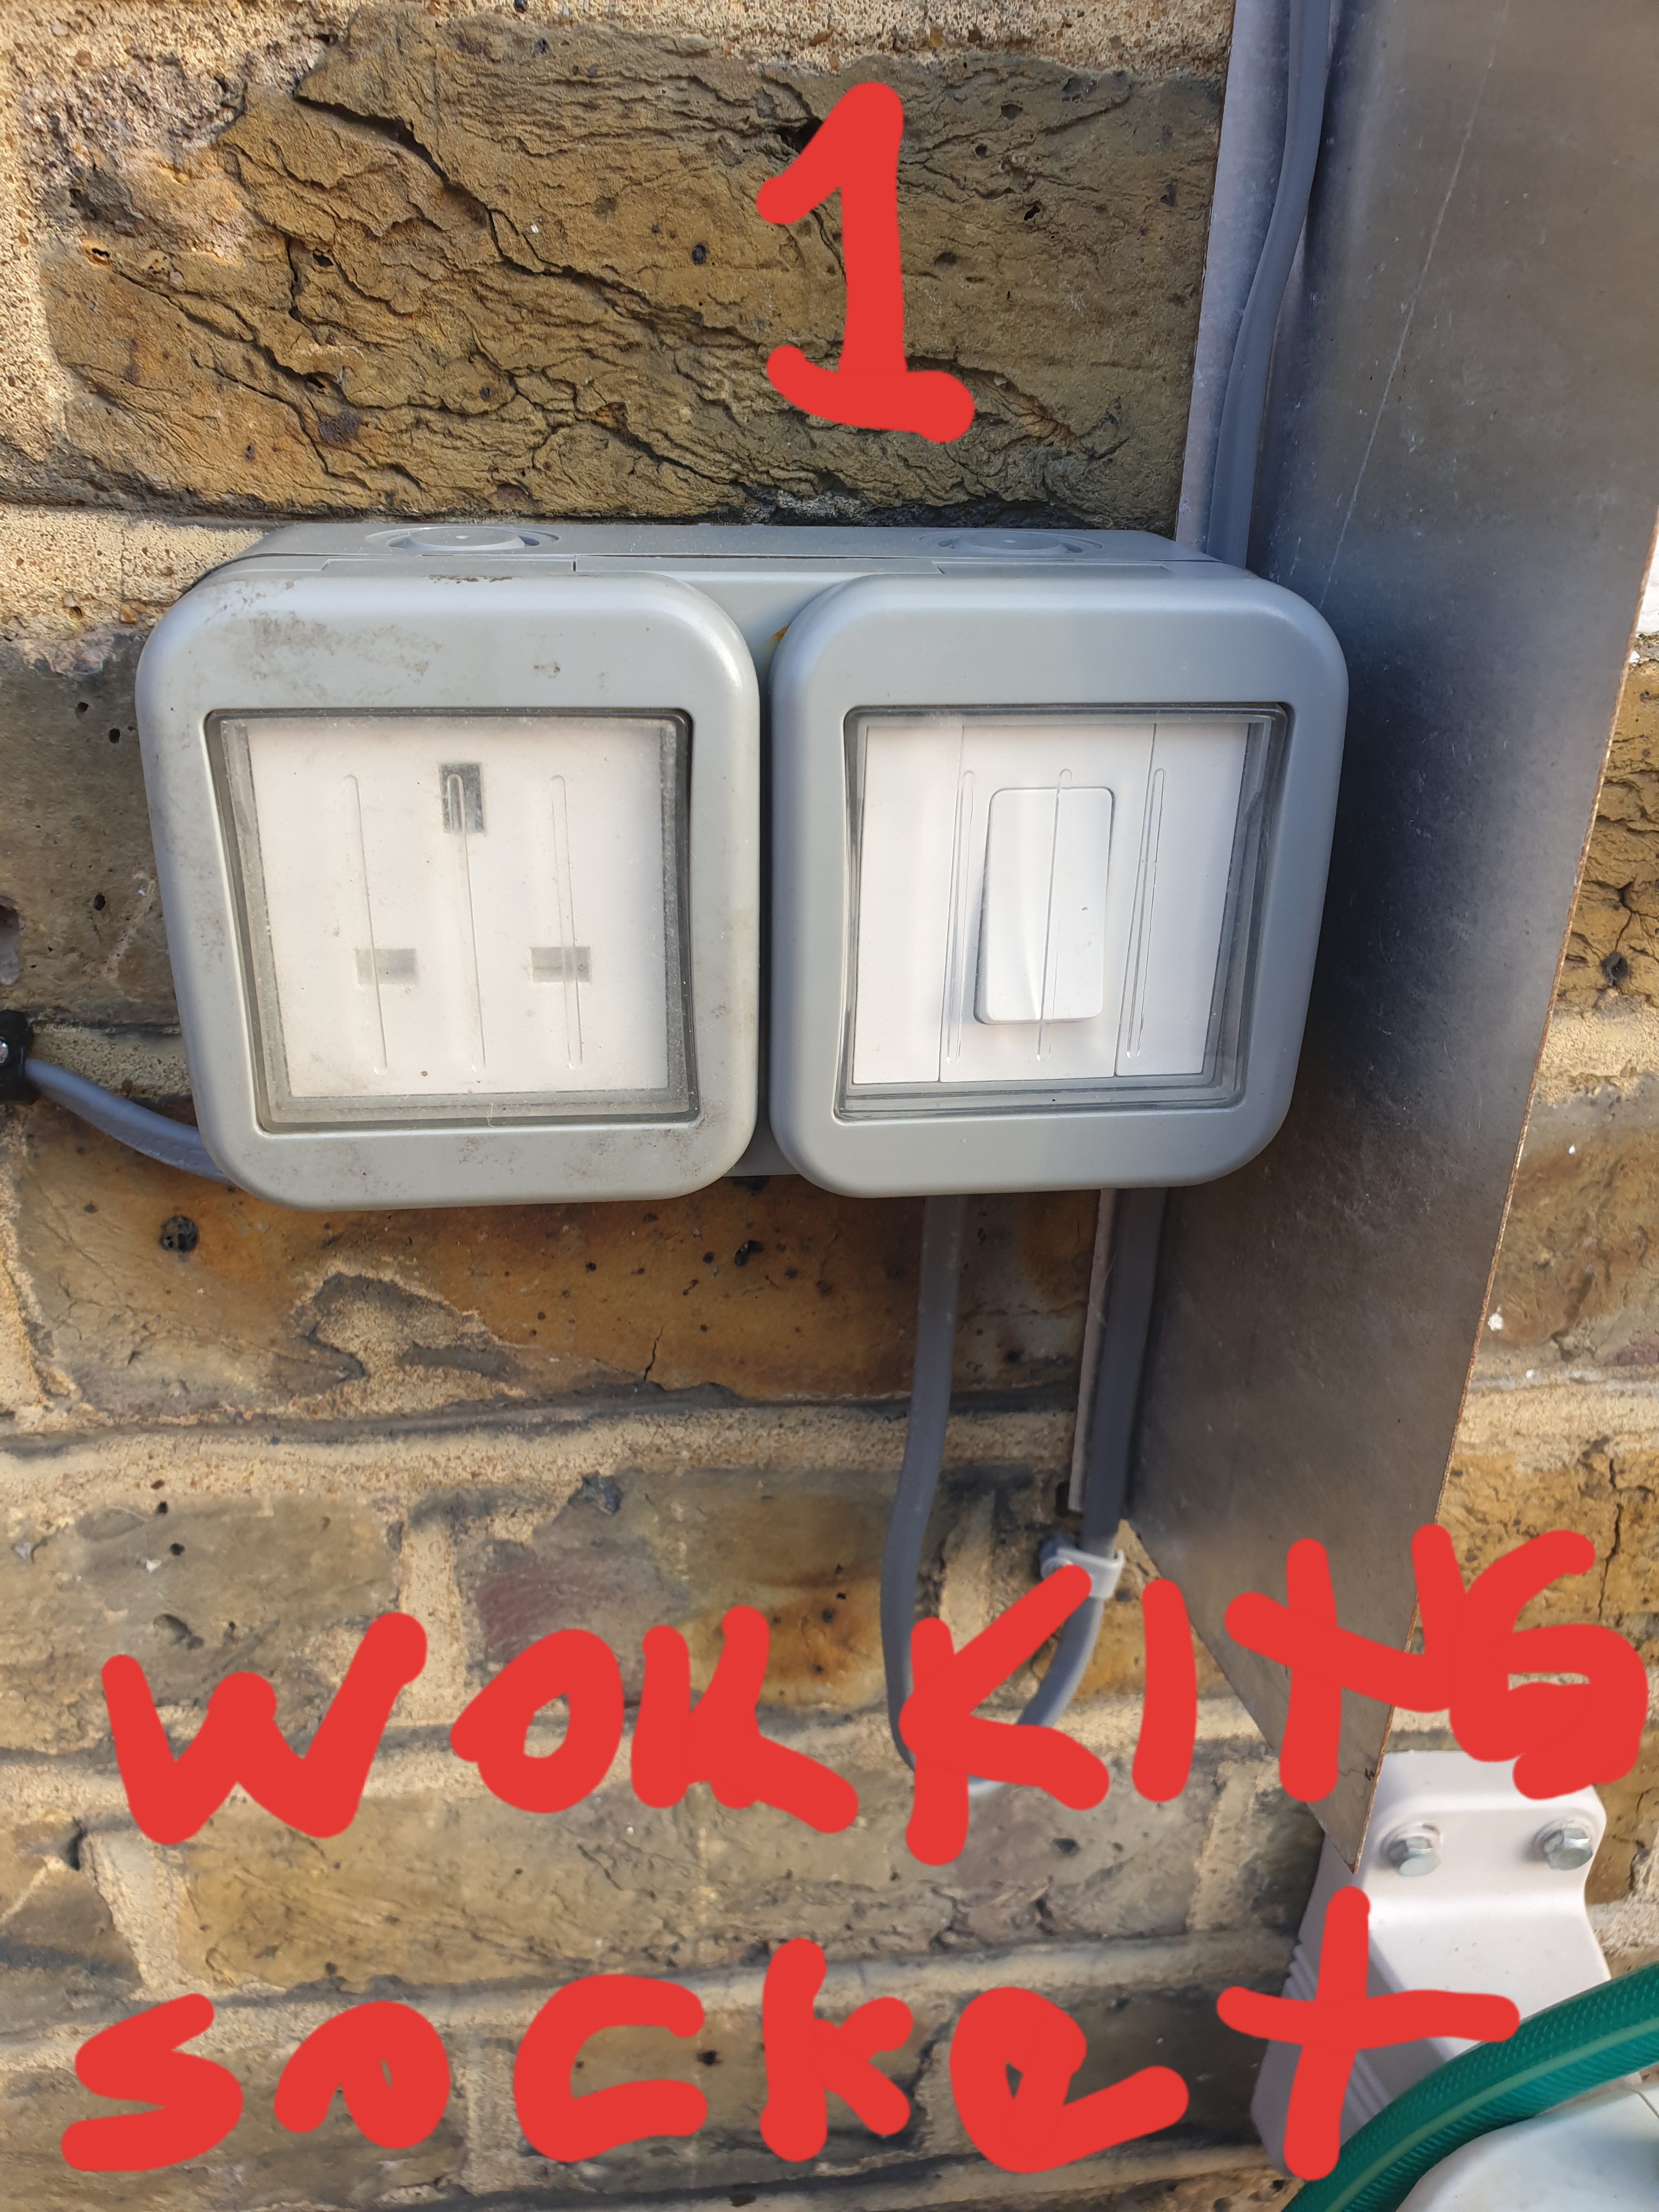 Need help with donestic outdoor light switch wiring 20190515_212223 - EletriciansForums.net